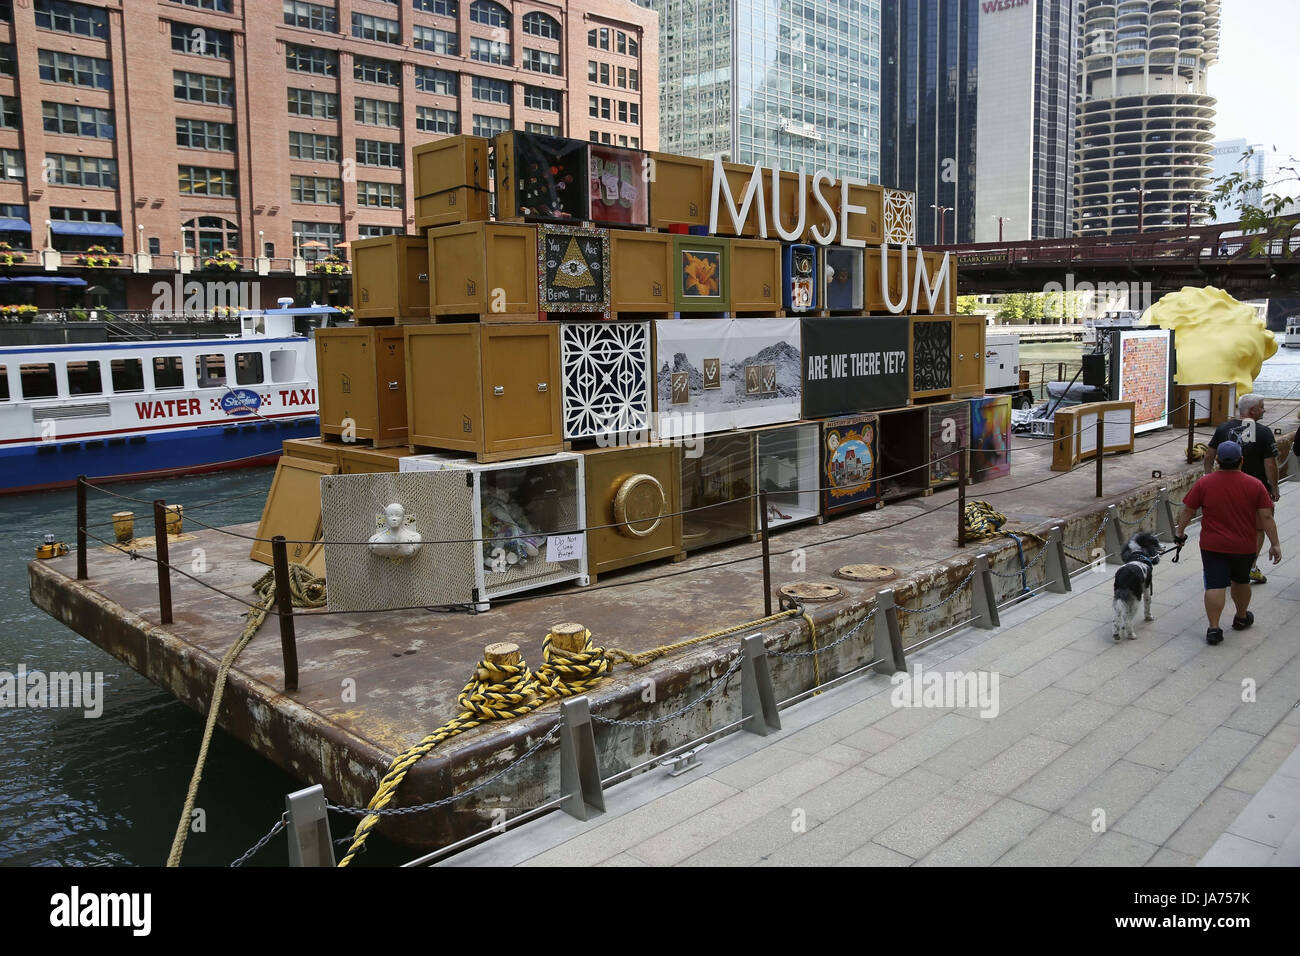 (170824) -- CHICAGO, Aug. 24, 2017 (Xinhua) -- Photo taken on Aug. 23, 2017 shows Floating Museum docked at the riverside in Chicago, the United States. Celebrating the River's industrial past, Floating Museum transforms a barge into an aesthetically striking mobile gallery filled with art crates displaying work created by local artists and our collaborators. Floating Museum exists in the continuum of artists examining their relationship to institutions, and responds to the evolution of museums; ranging from the cabinet of curiosities or Wunderkabinett between the sixteenth and eighteenth cent Stock Photo